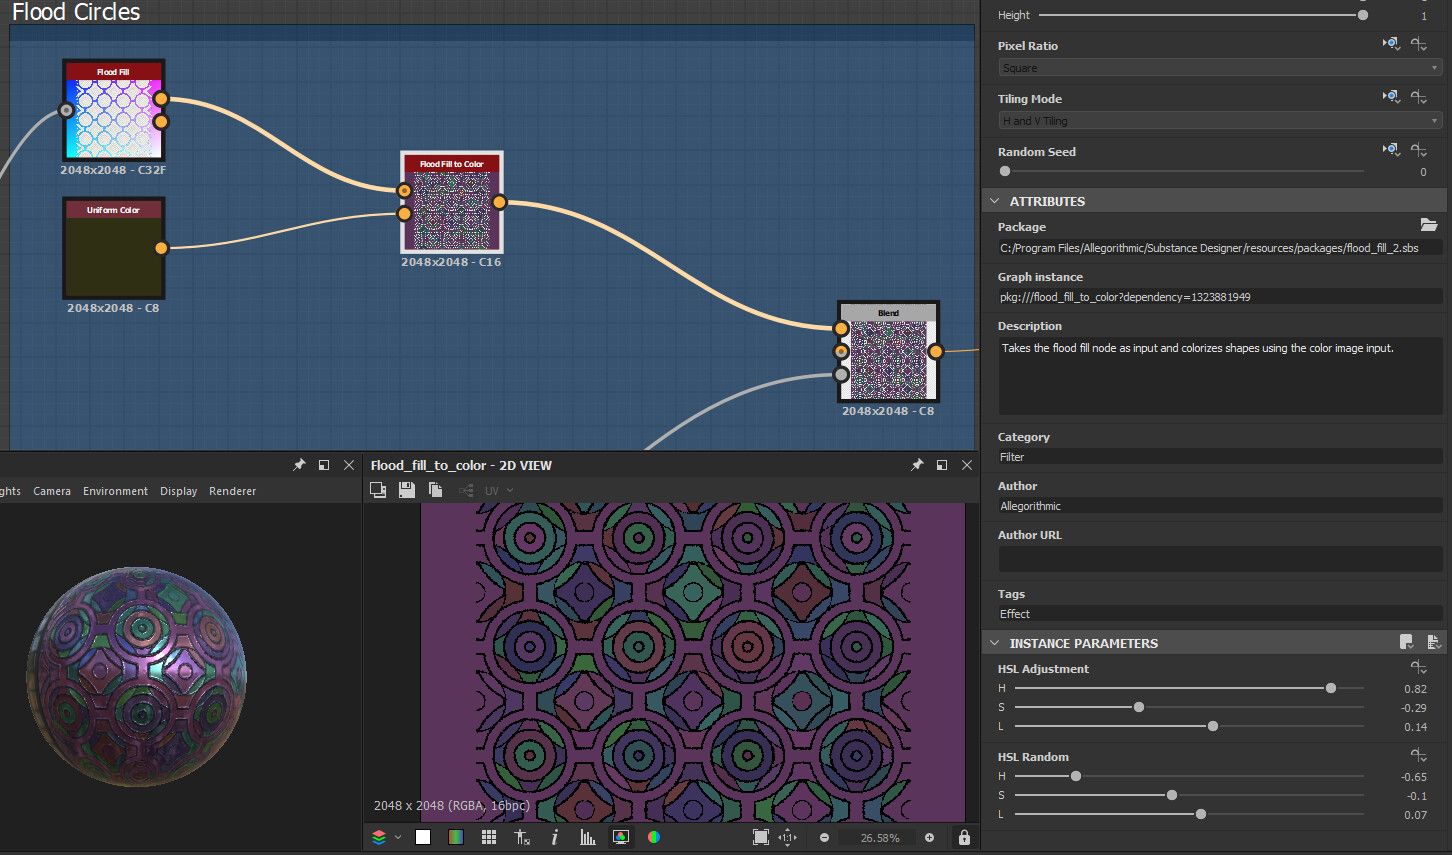 Screenshot from Substance Designer showing node set up that creates the above described colored circles for the stained glass. The screenshot is focused on “Flood Fill” nodes.